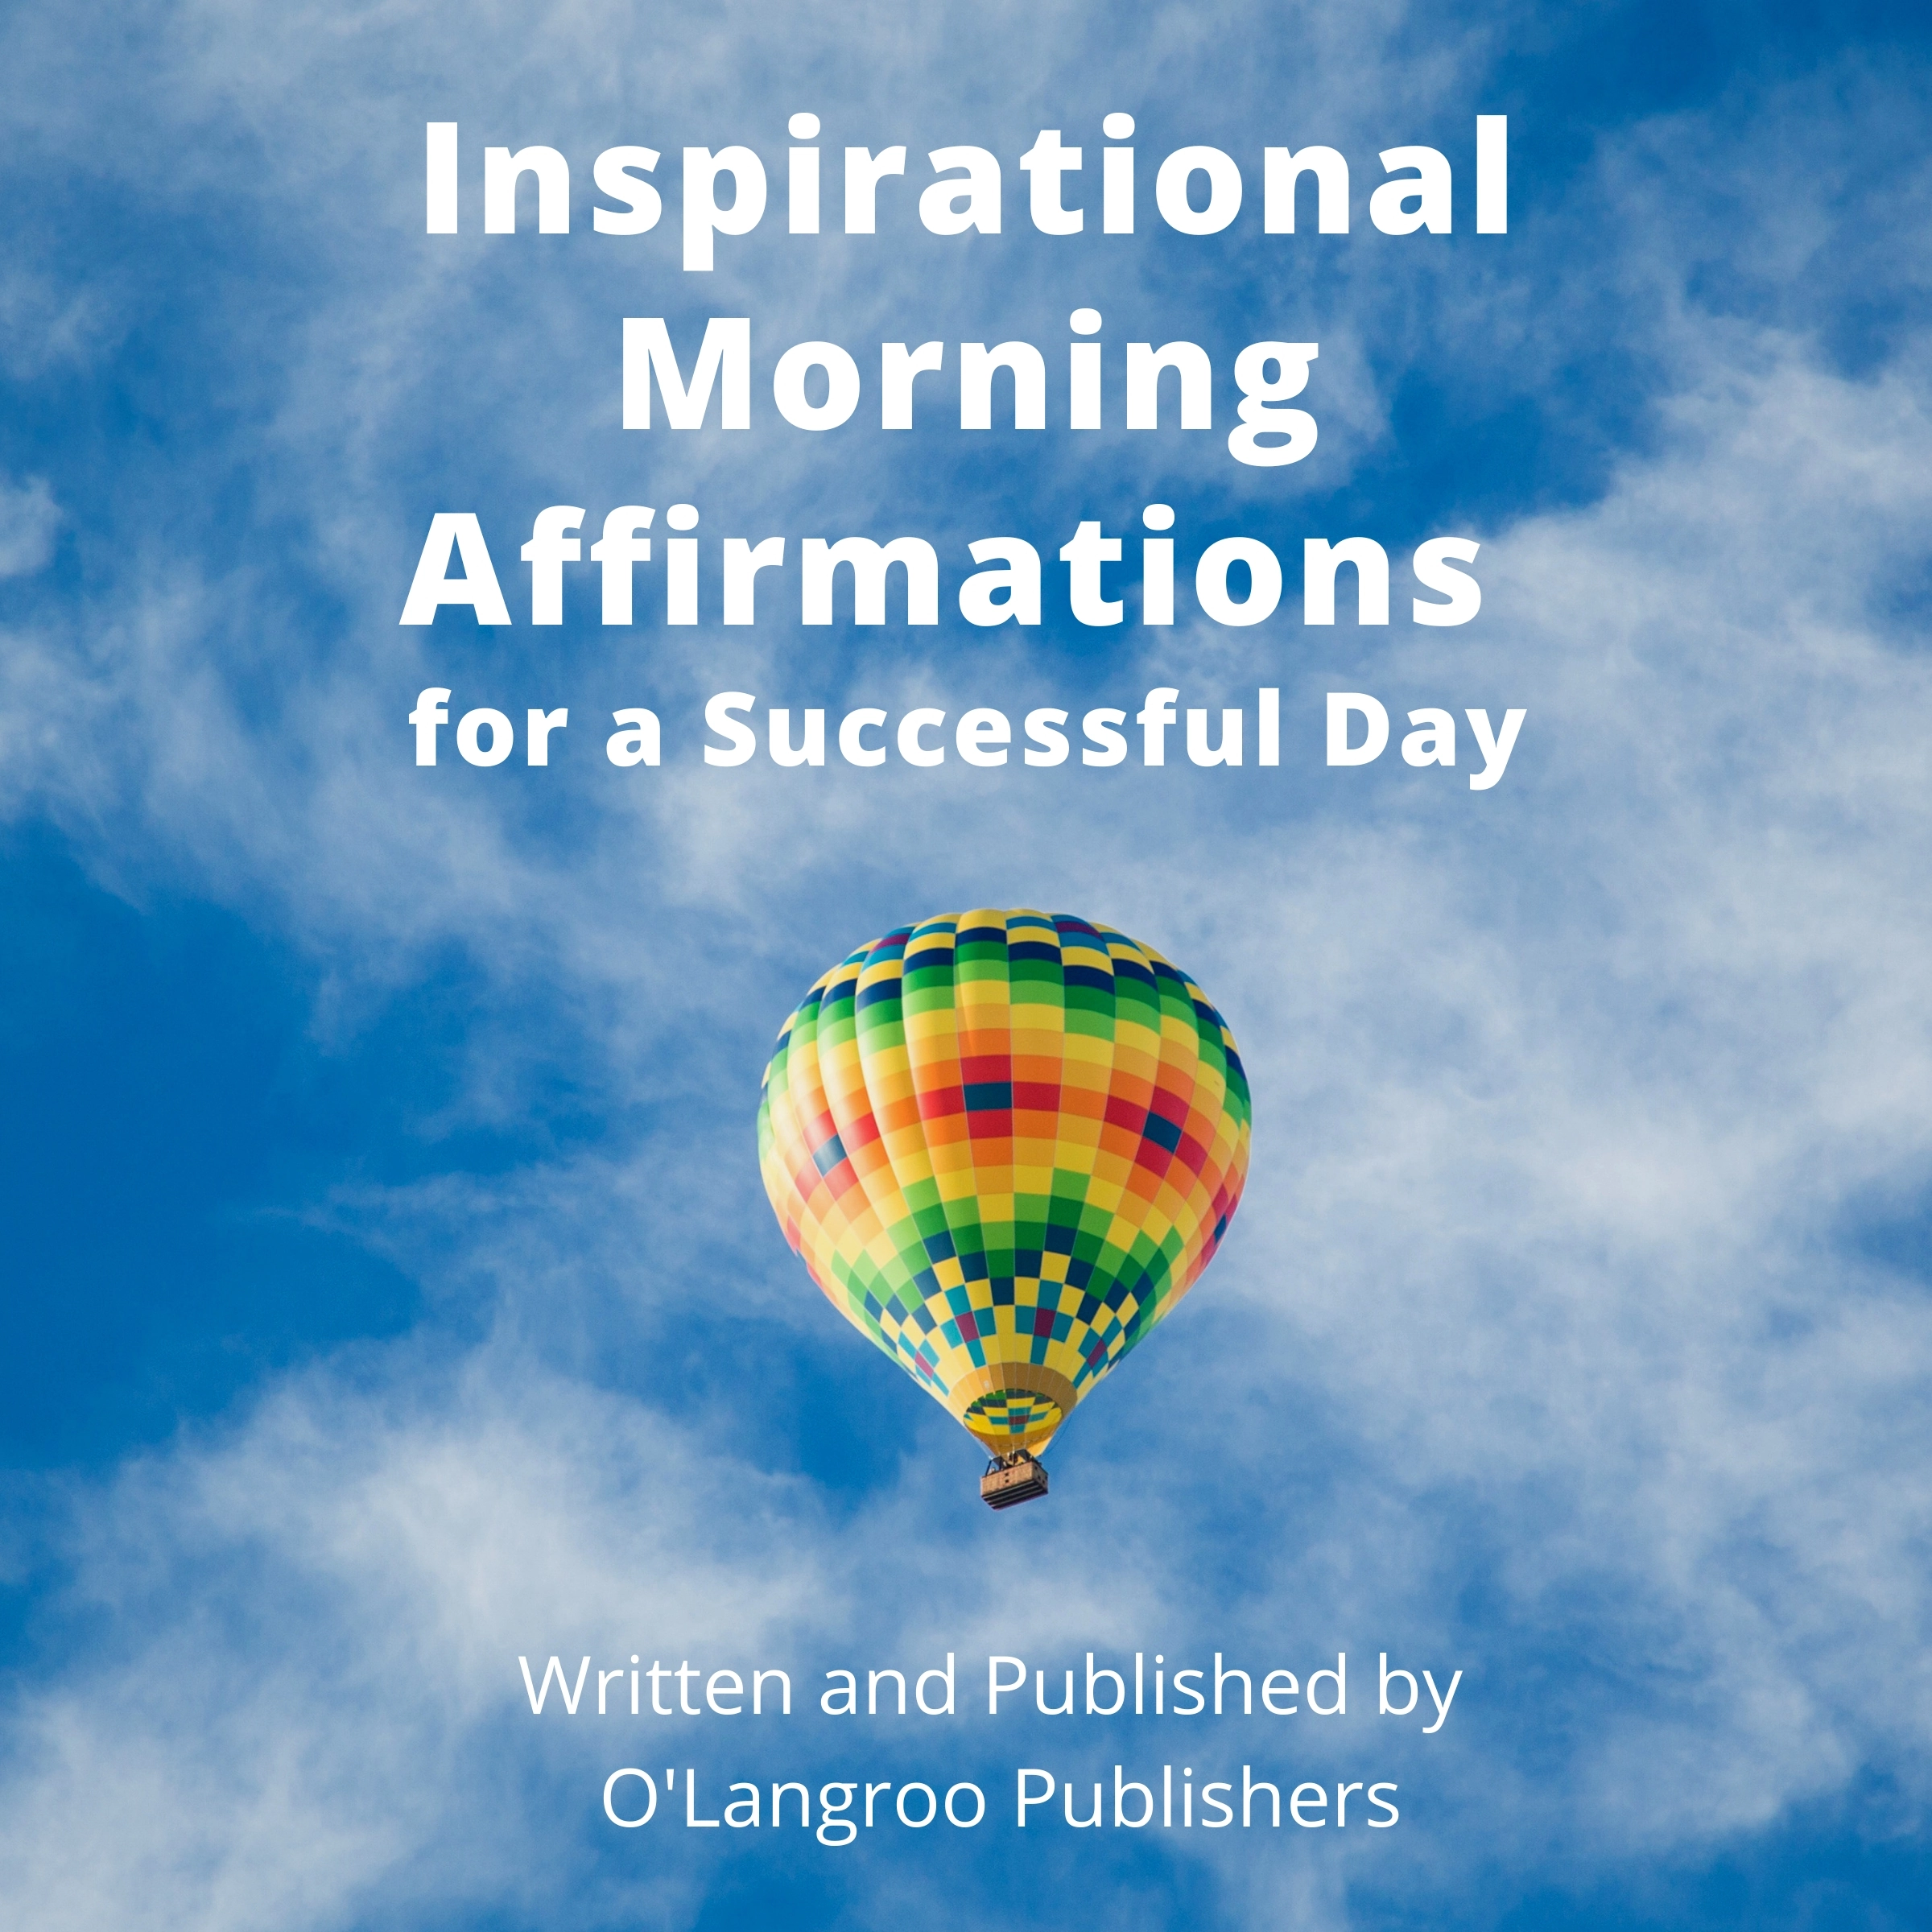 Inspirational Morning Affirmations for a Successful Day Audiobook by O'Langroo Publishers